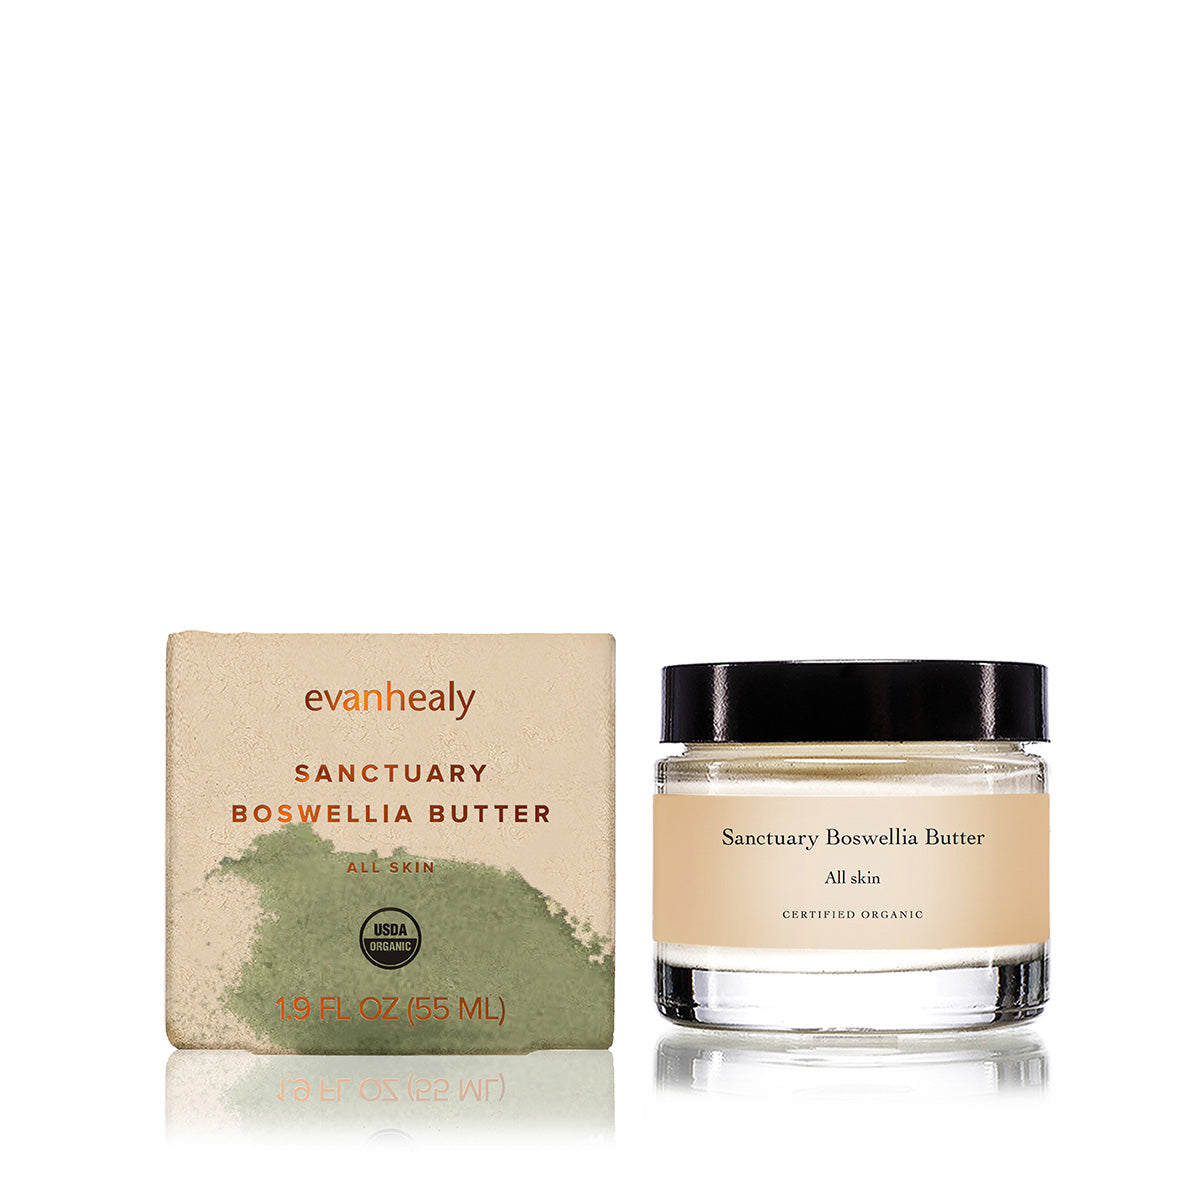 evanhealy sanctuary boswellia butter facial moisturizer with frankincense next to product box